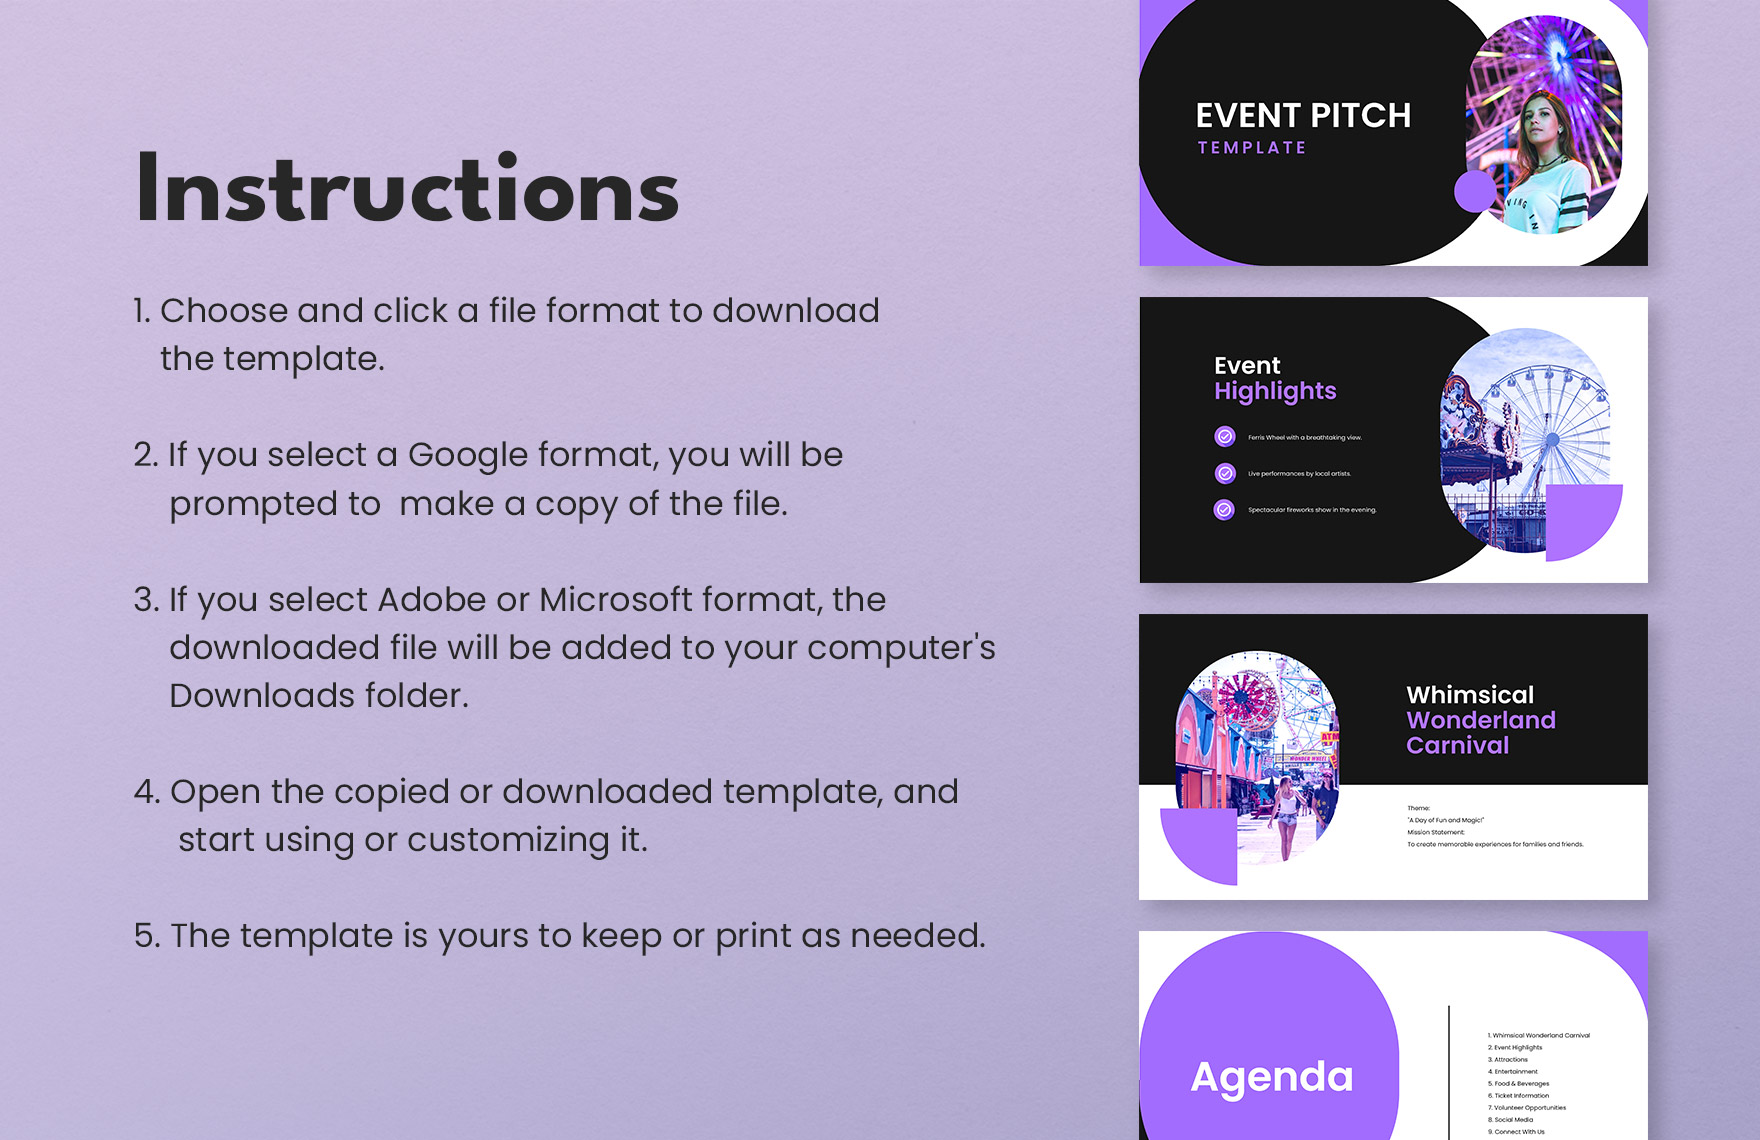 Event Pitch Template